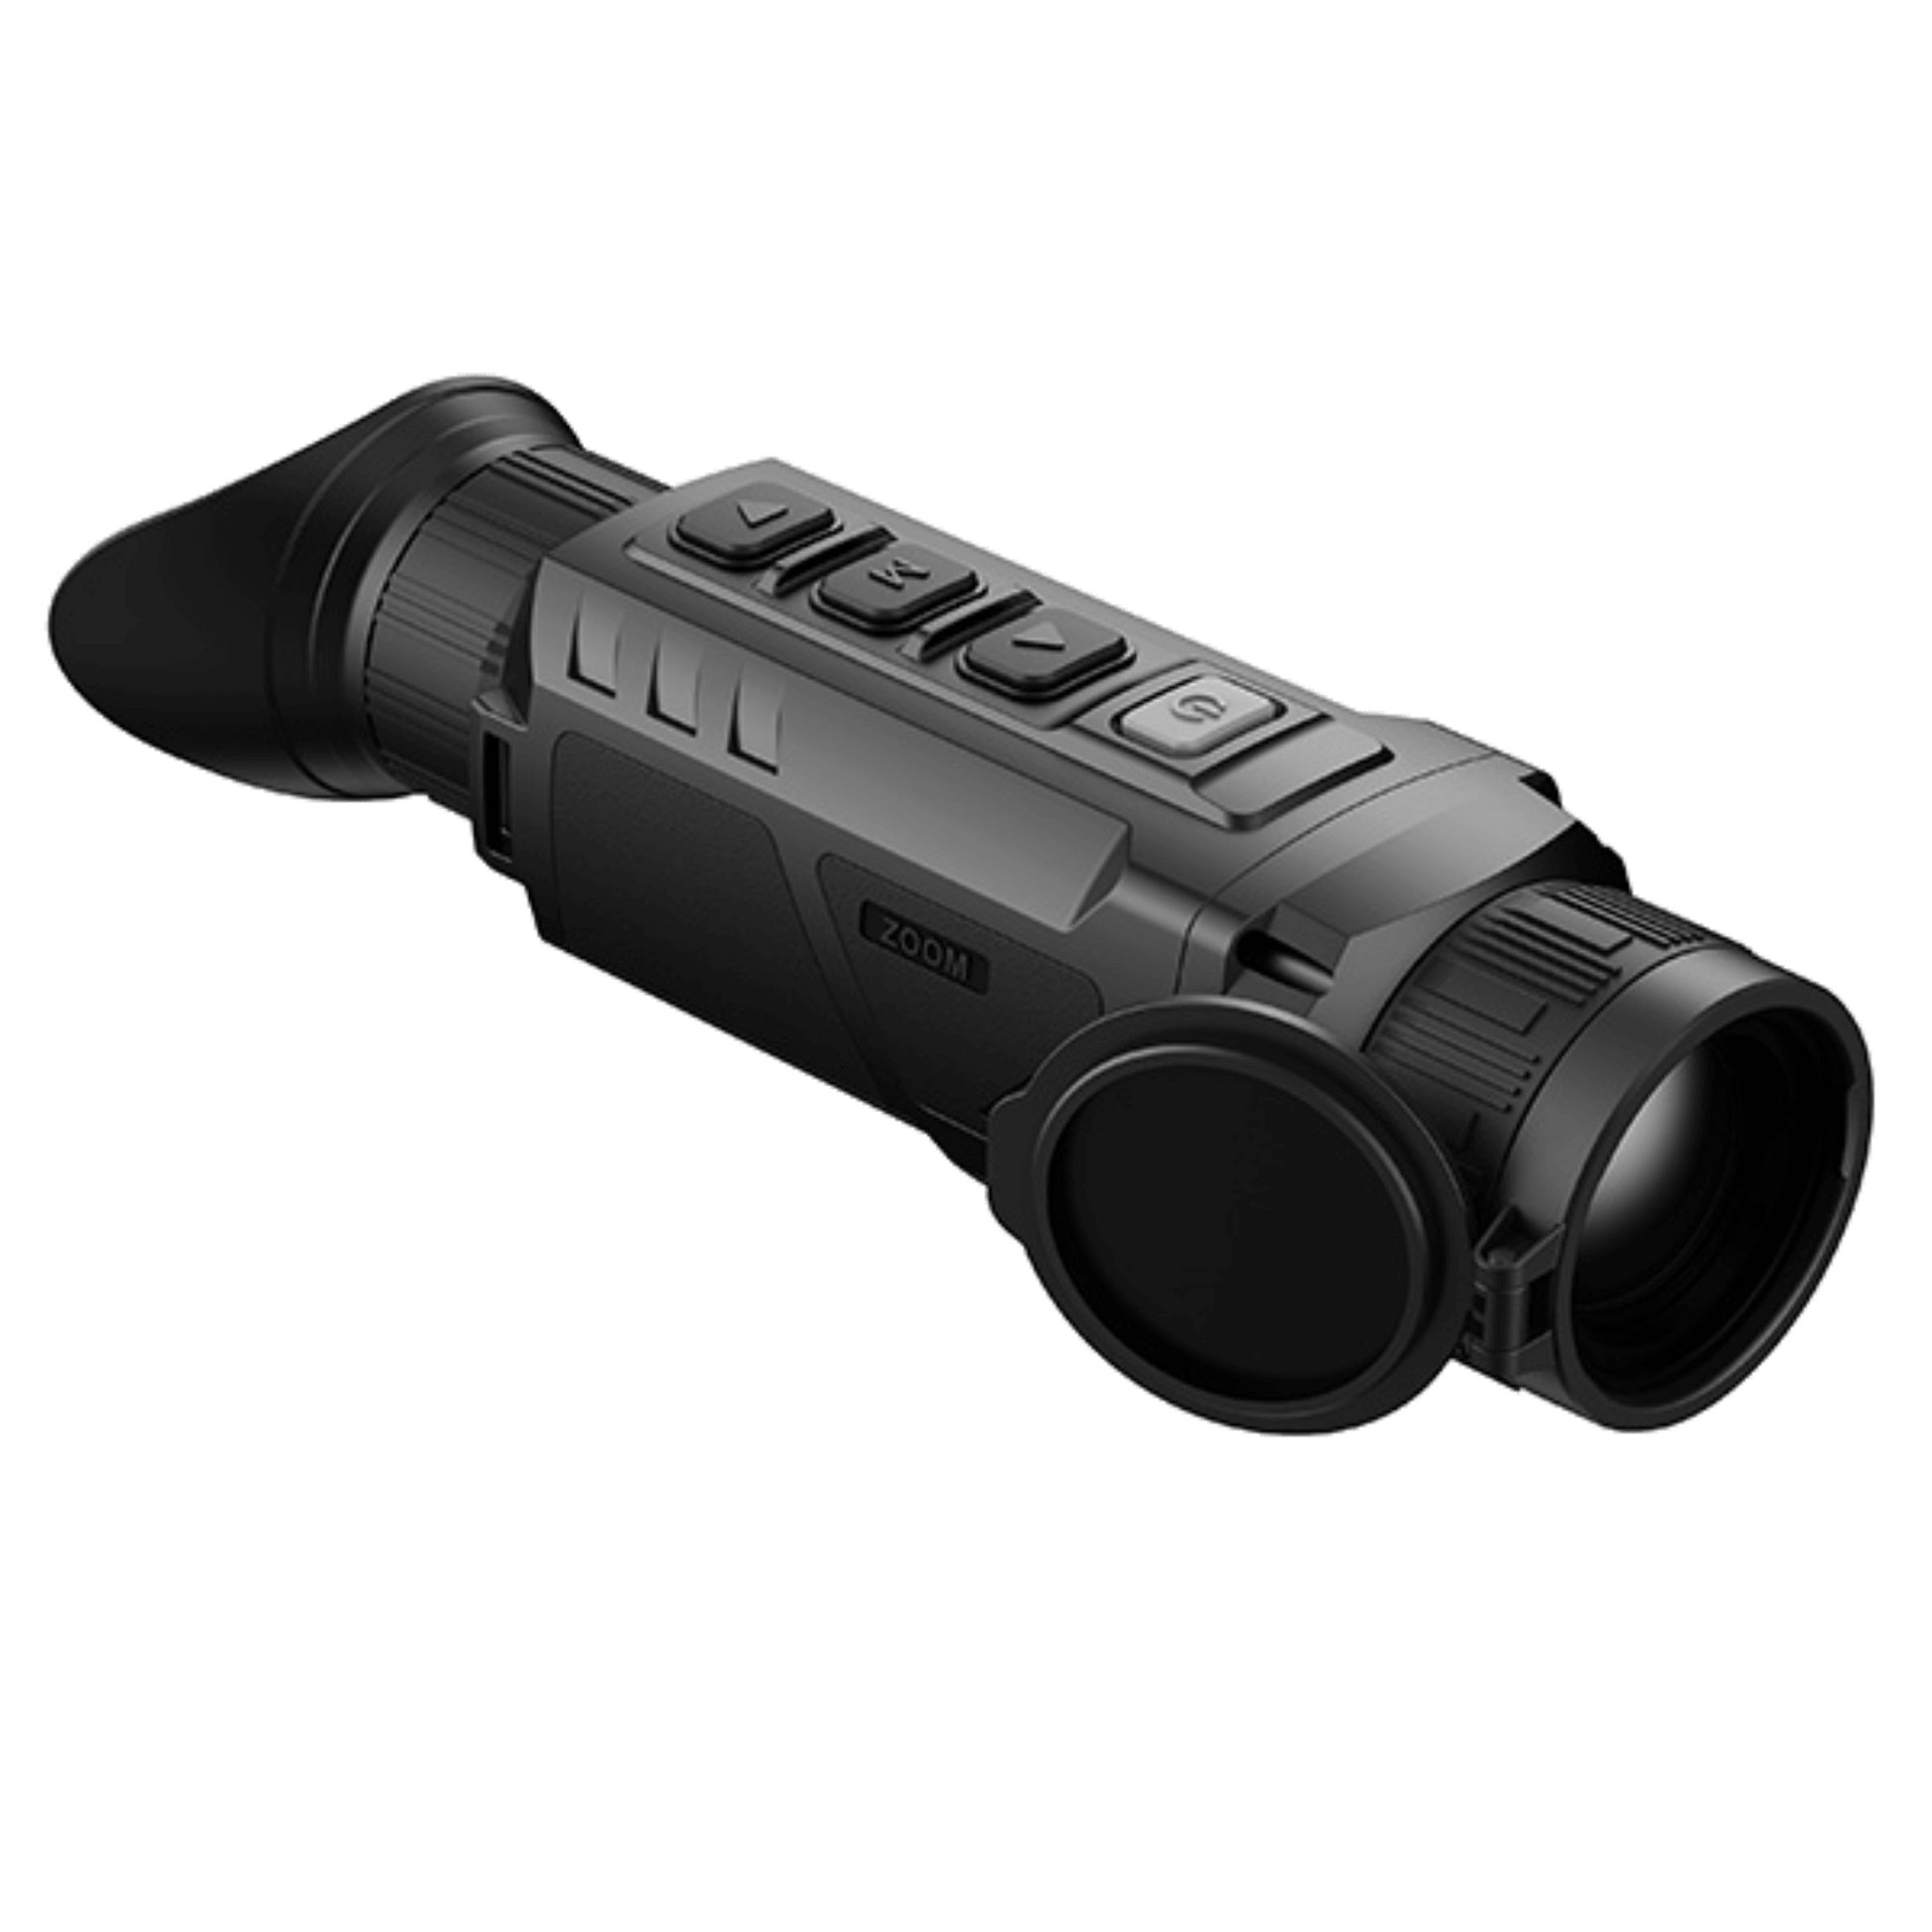 Cape Thermal - The best thermal imaging monoculars for sale - Infiray Zoom Series ZH38 Handheld thermal imaging monocular - Front Side View